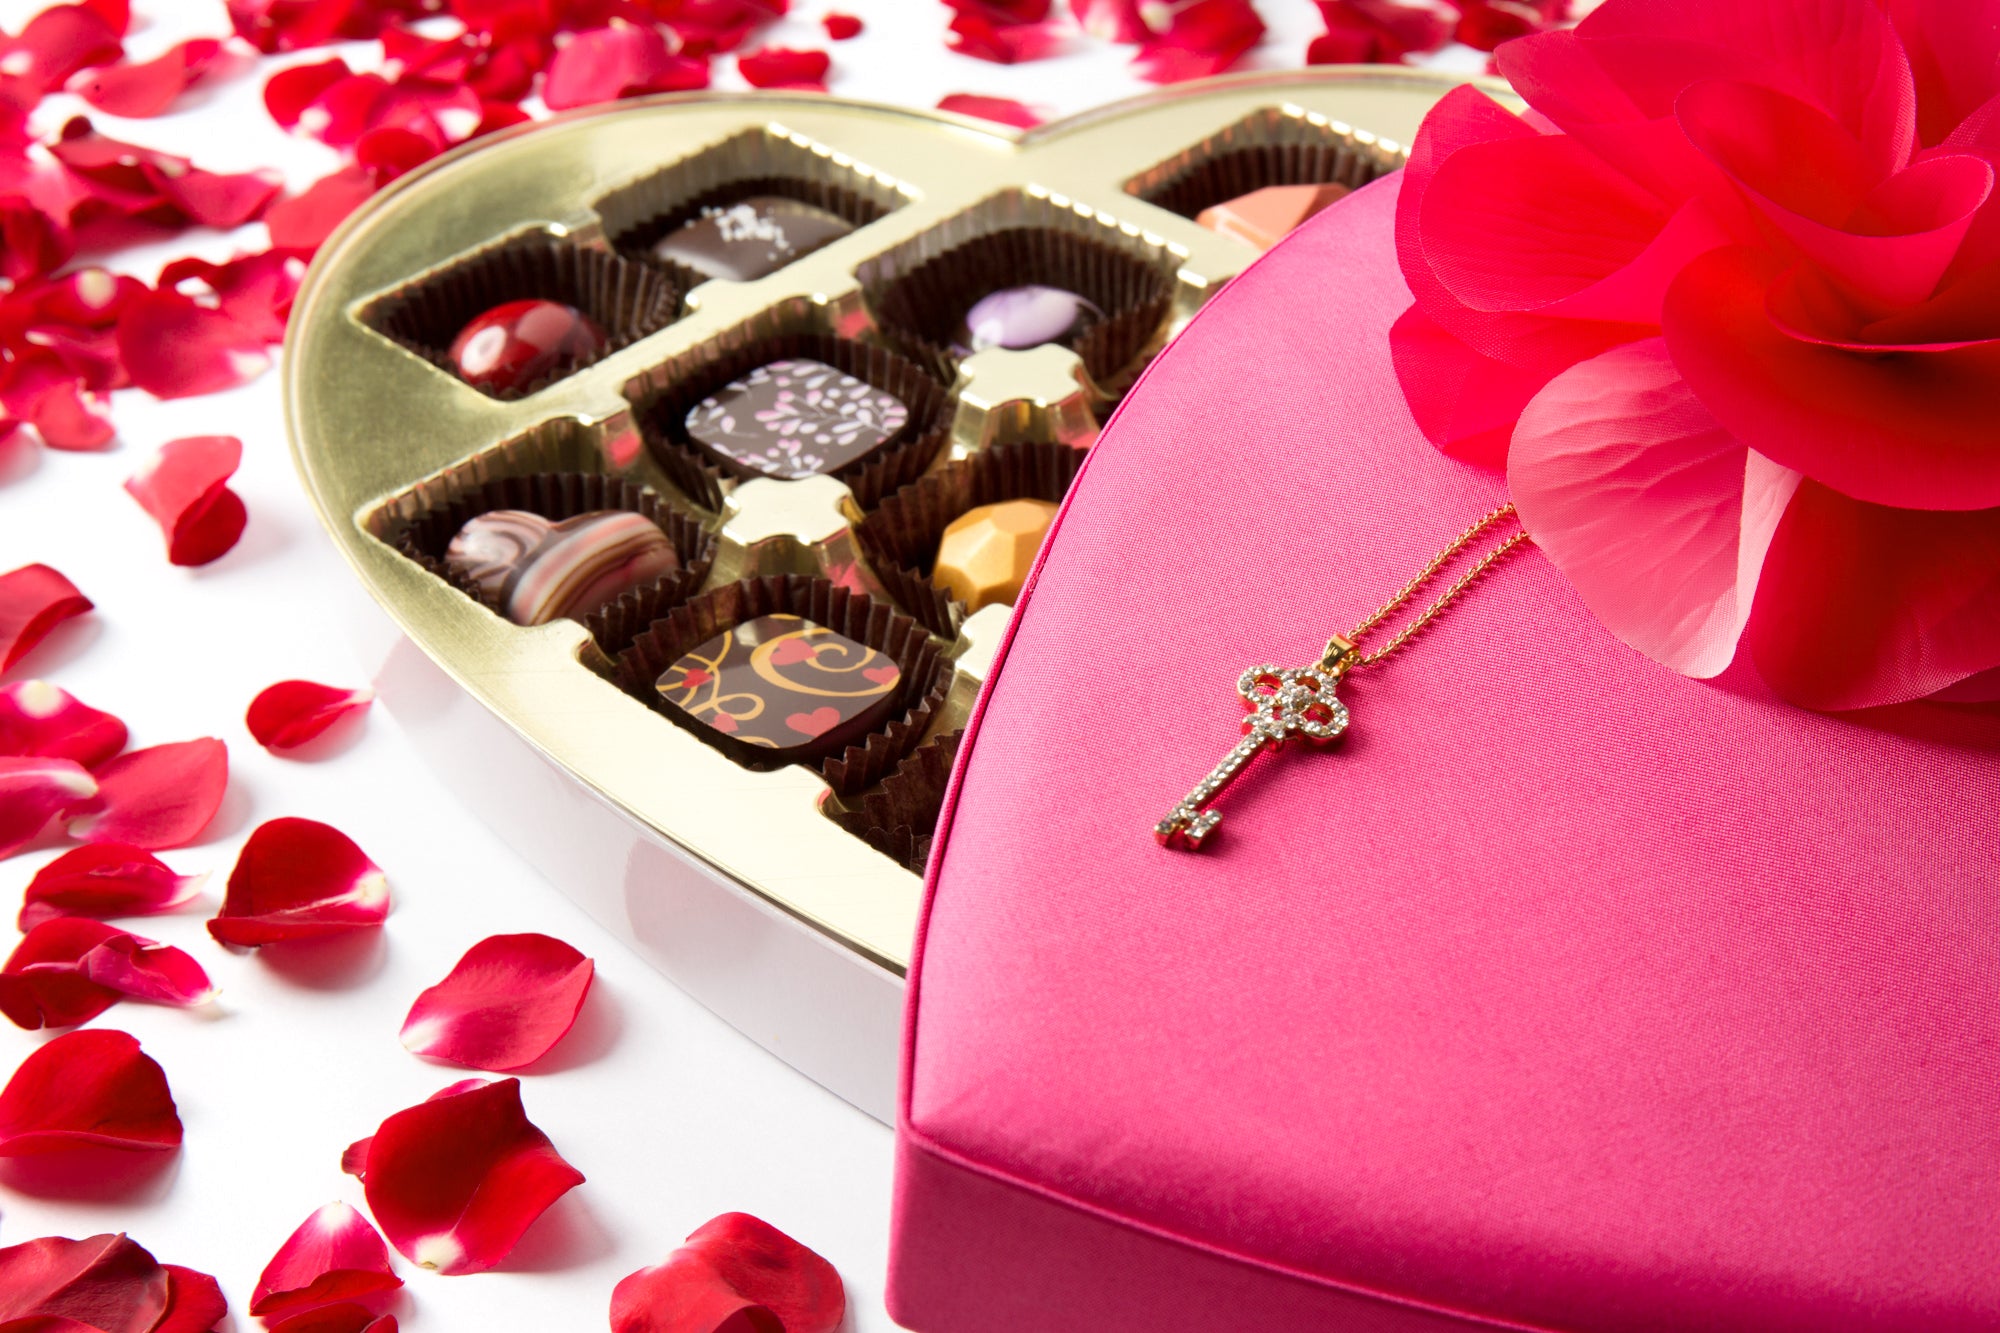 Pink heart shaped box of chocolates with rose petals from St. Croix Chocolate Company